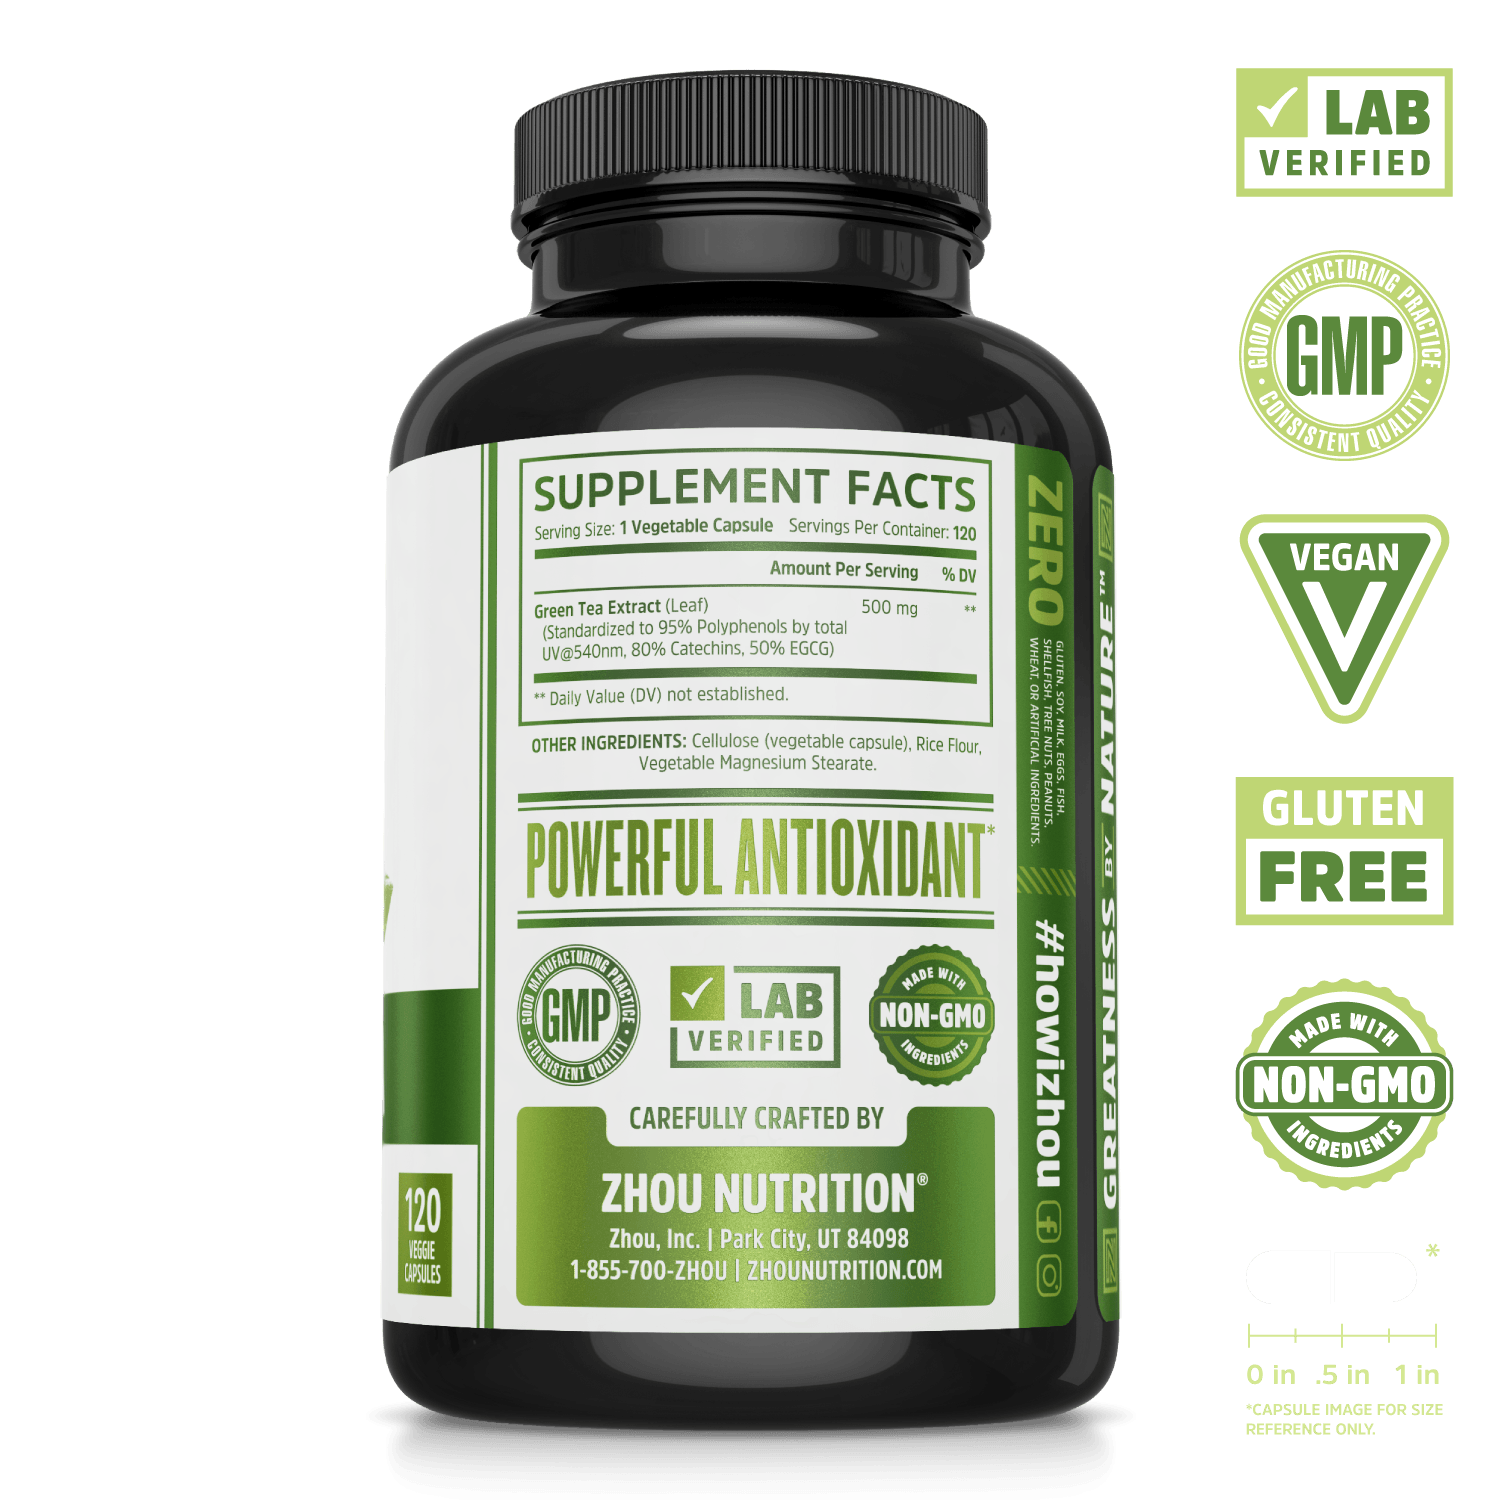 Green Tea Extract Supplement with EGCG. Lab verified, good manufacturing practices, vegan, gluten free, made with non-GMO ingredients